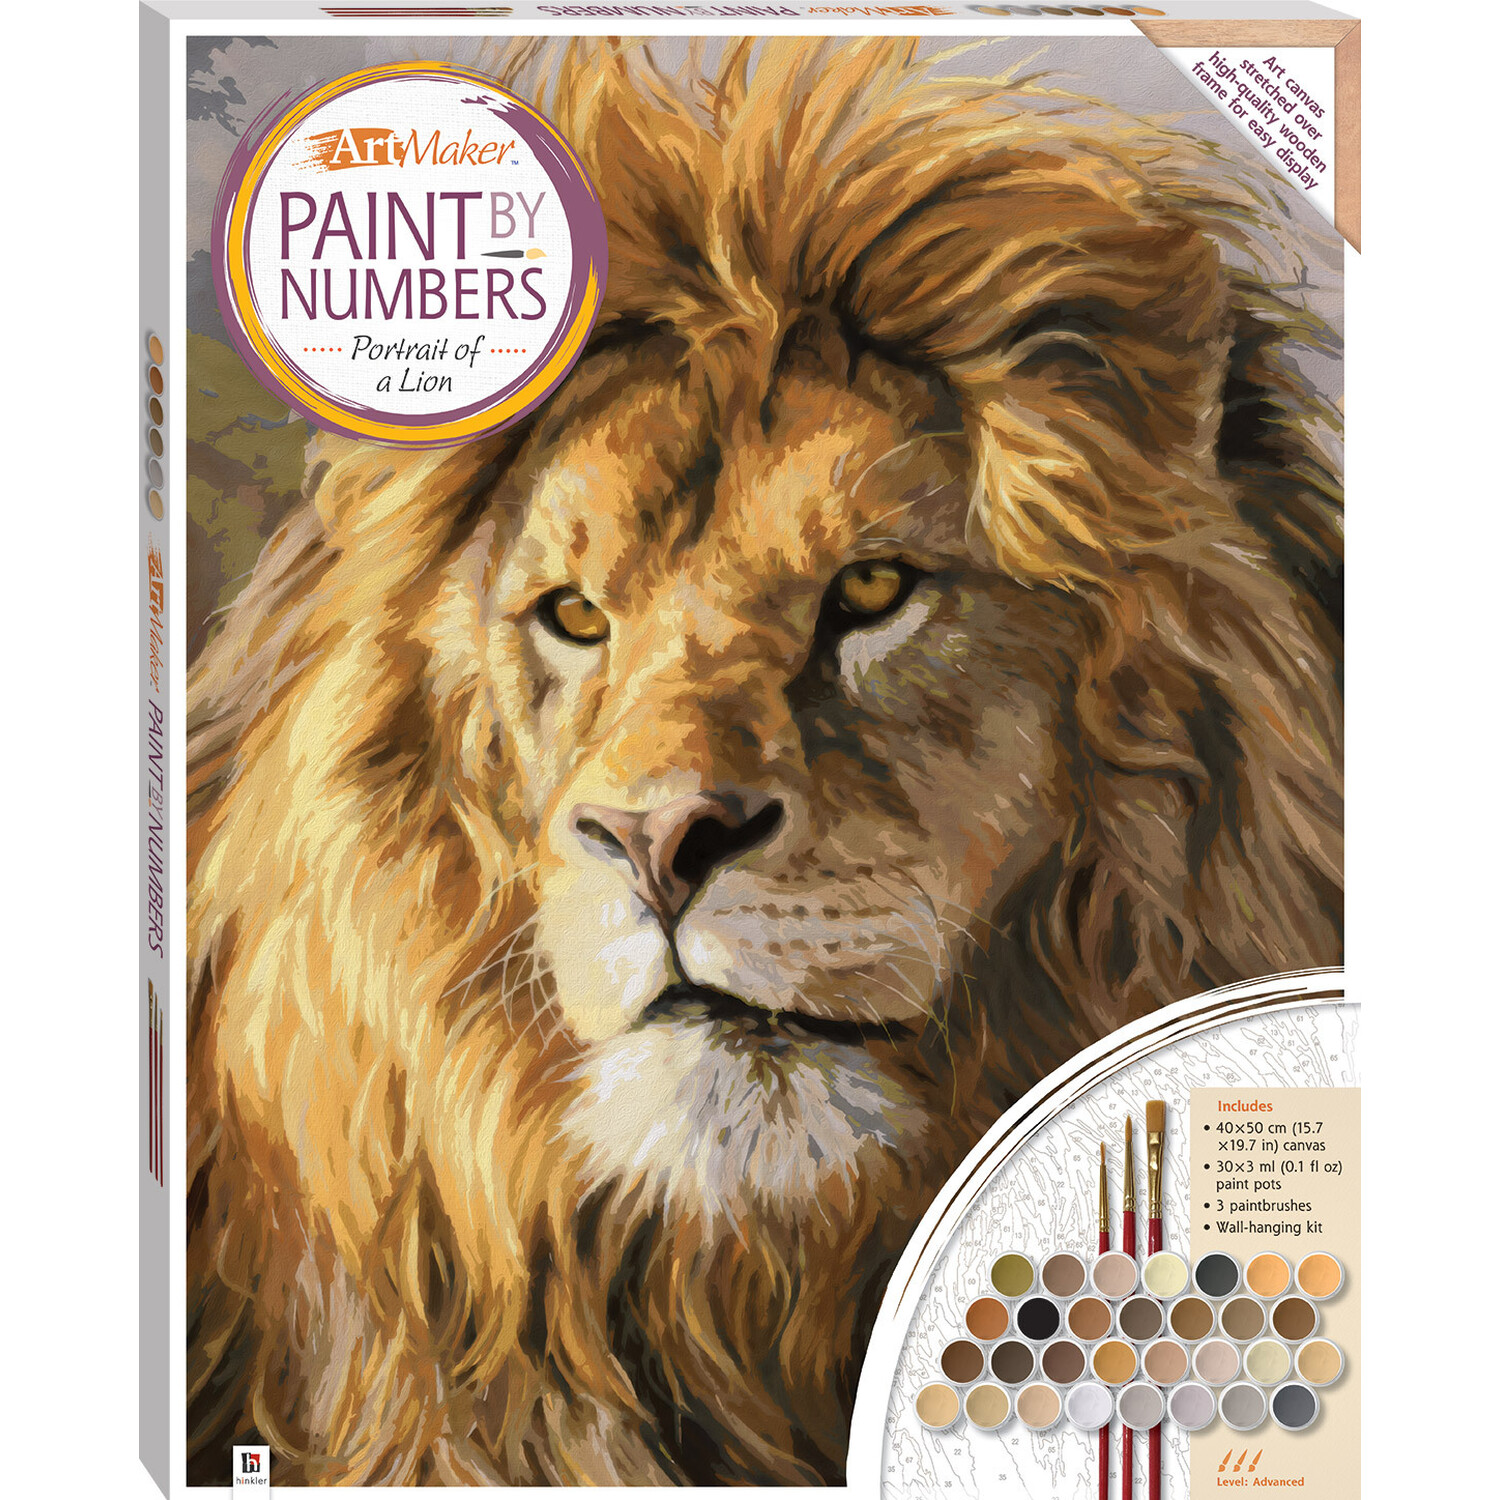 Hinkler Paint by Numbers Lion Canvas Kit Image